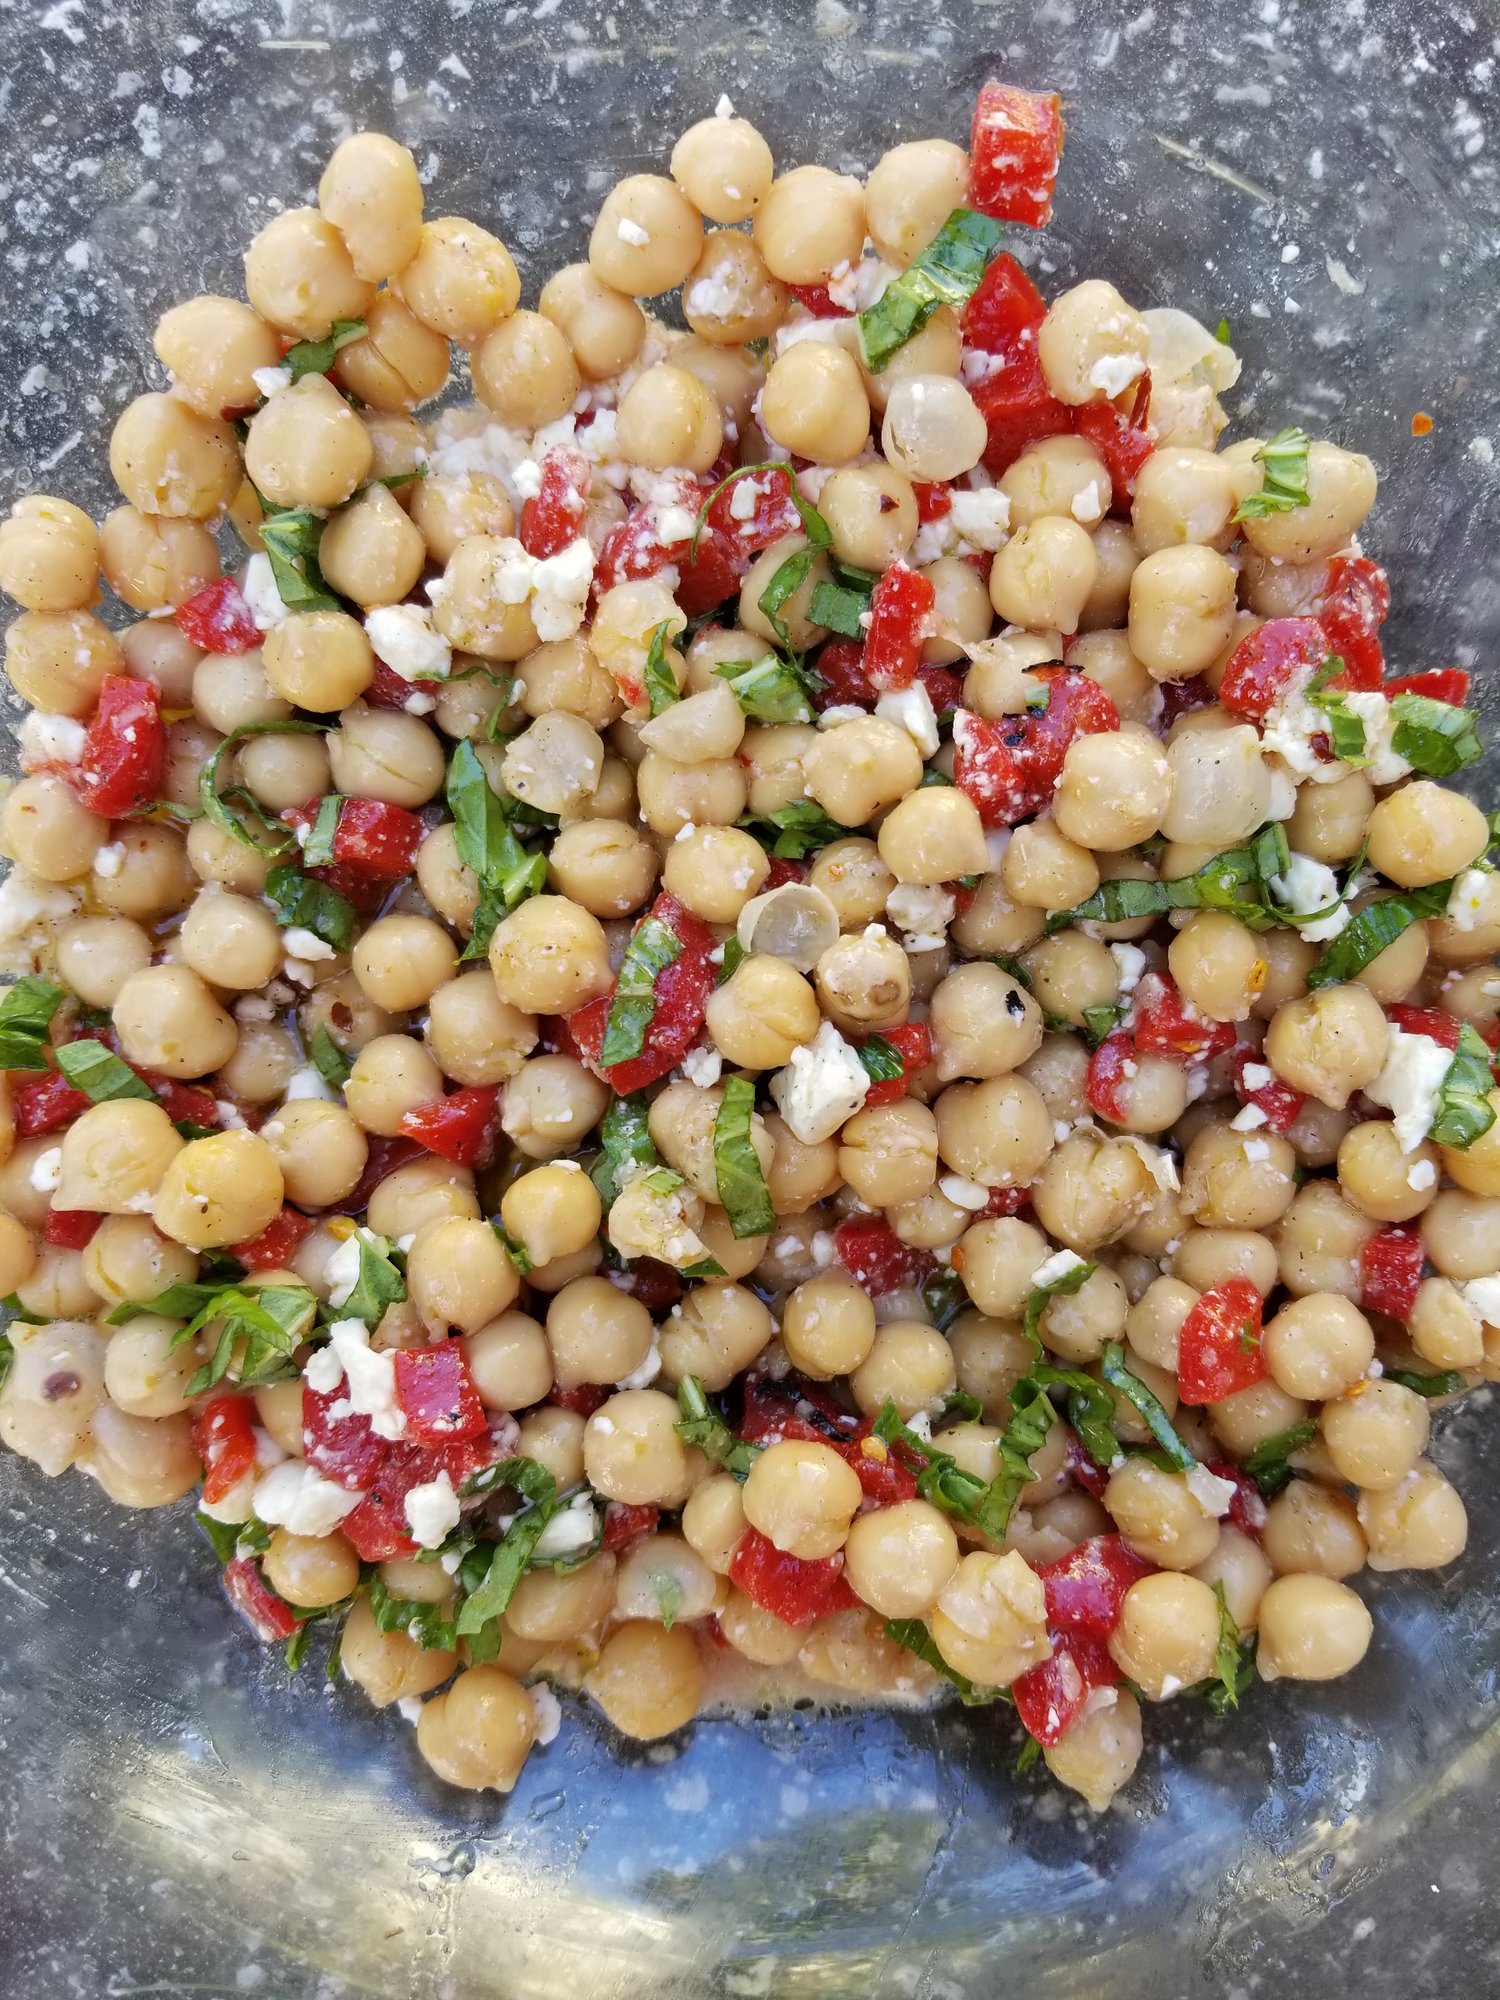 That's A Keeper 9 - Marinated Chickpeas.jpg